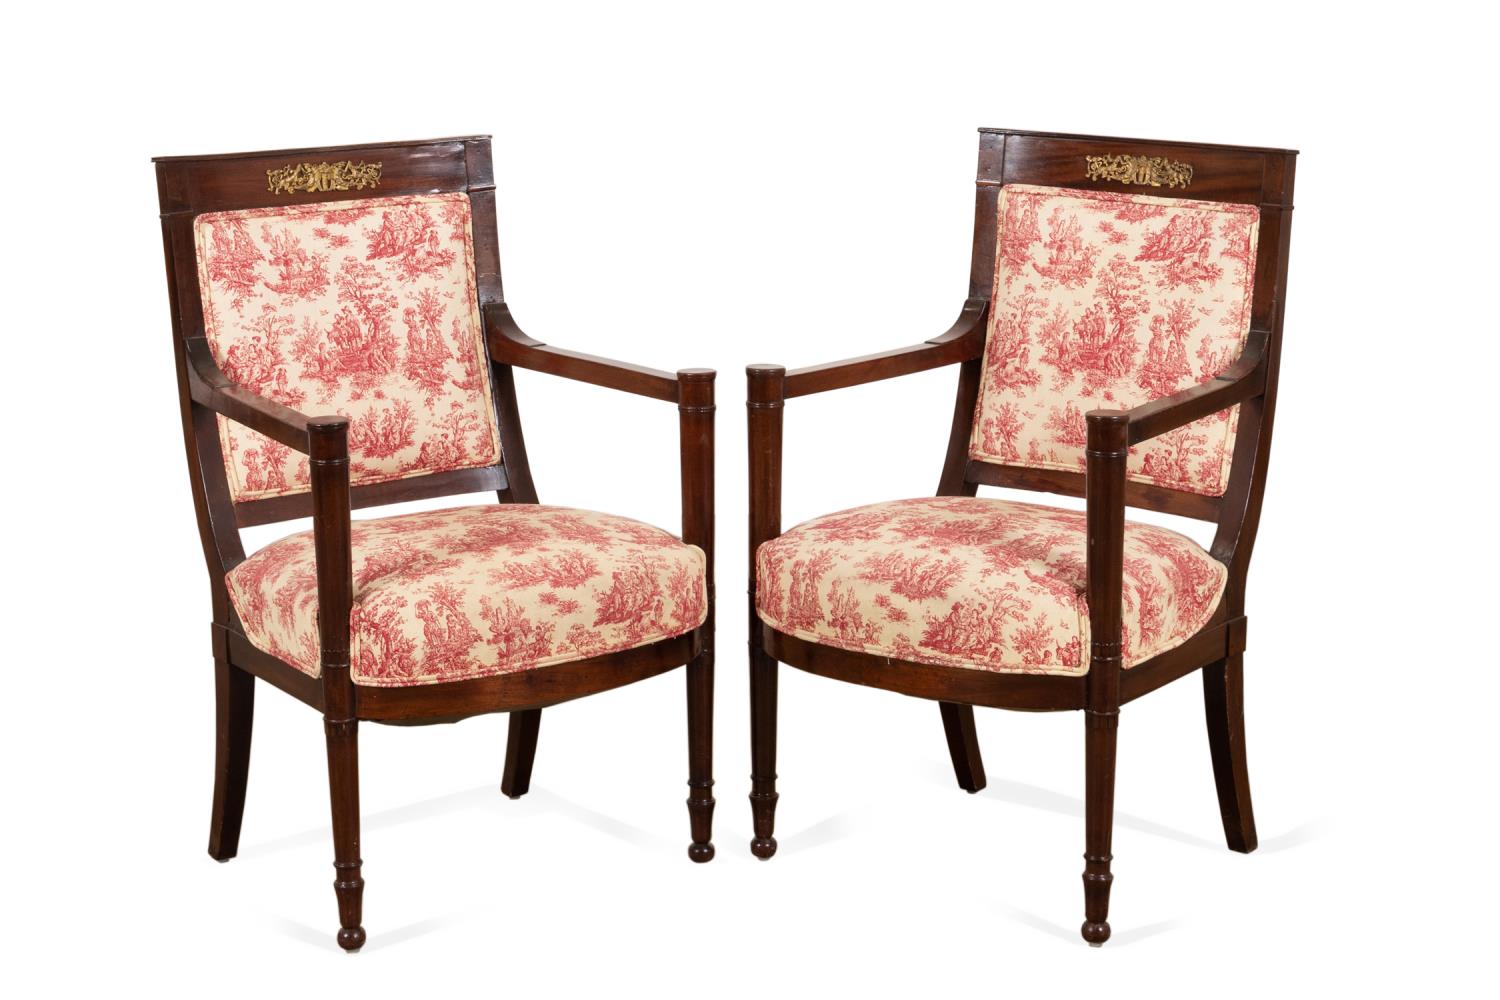 PAIR FRENCH EMPIRE STYLE ARMCHAIRS  2f9922